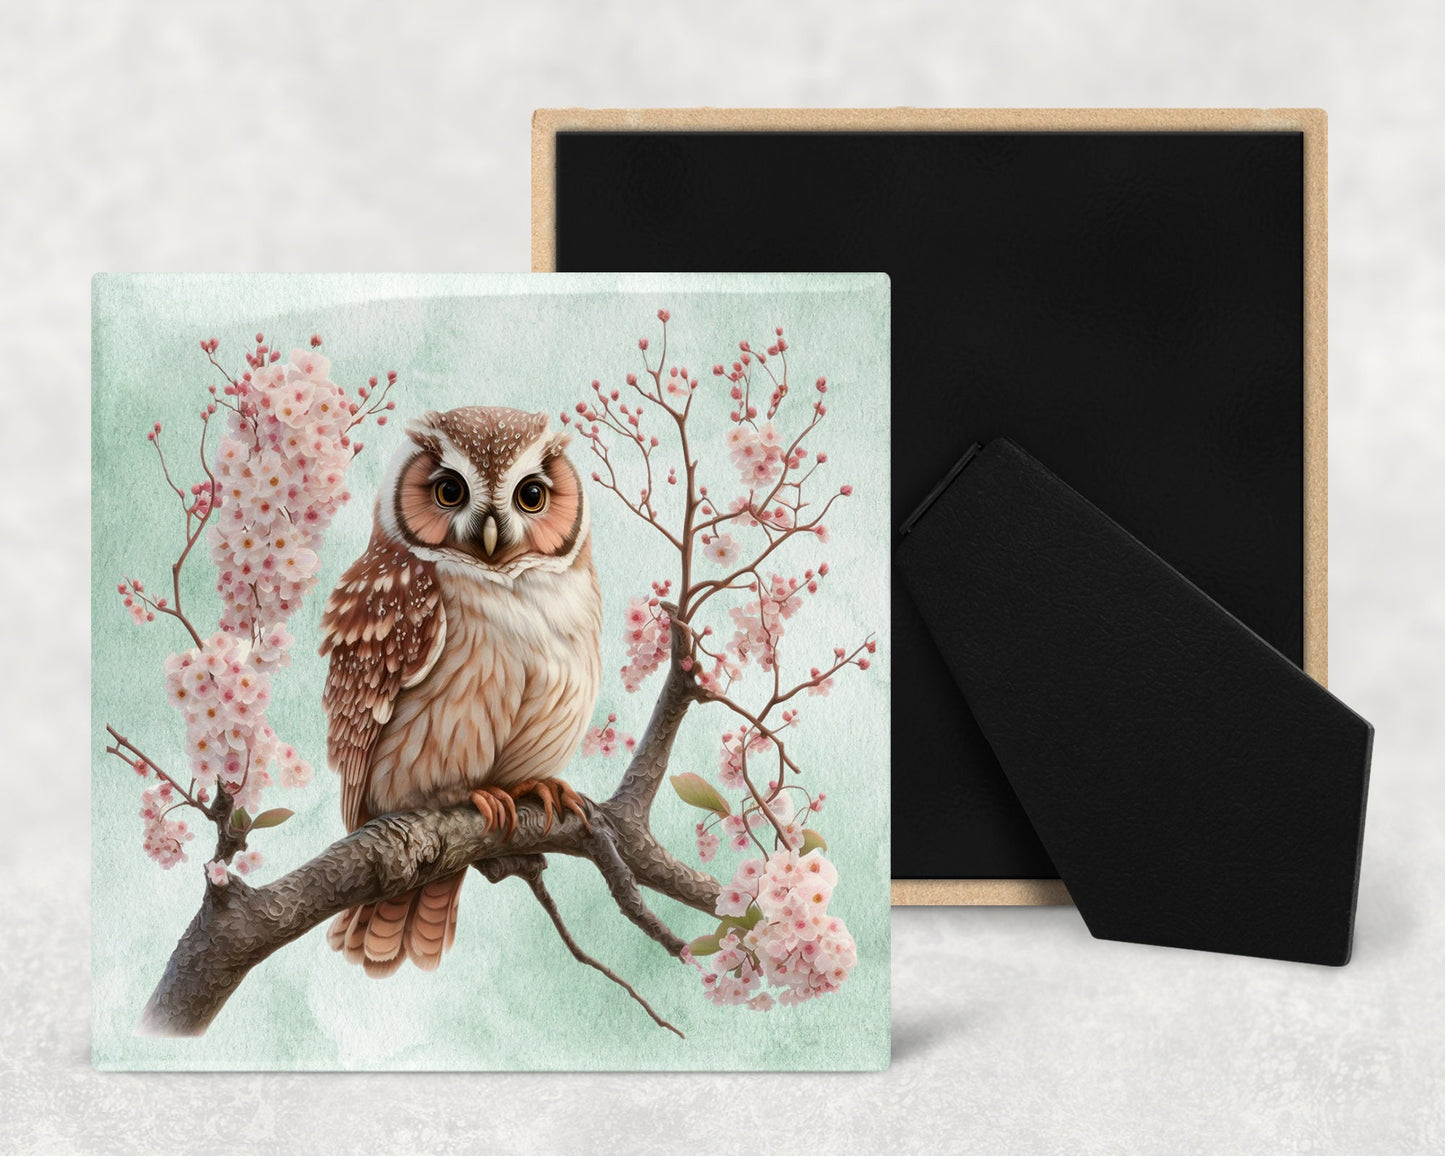 Cute Owl on Cherry Blossoms Decorative Ceramic Tile Set with Optional Easel Back - Available in 4 sizes - Set of 4